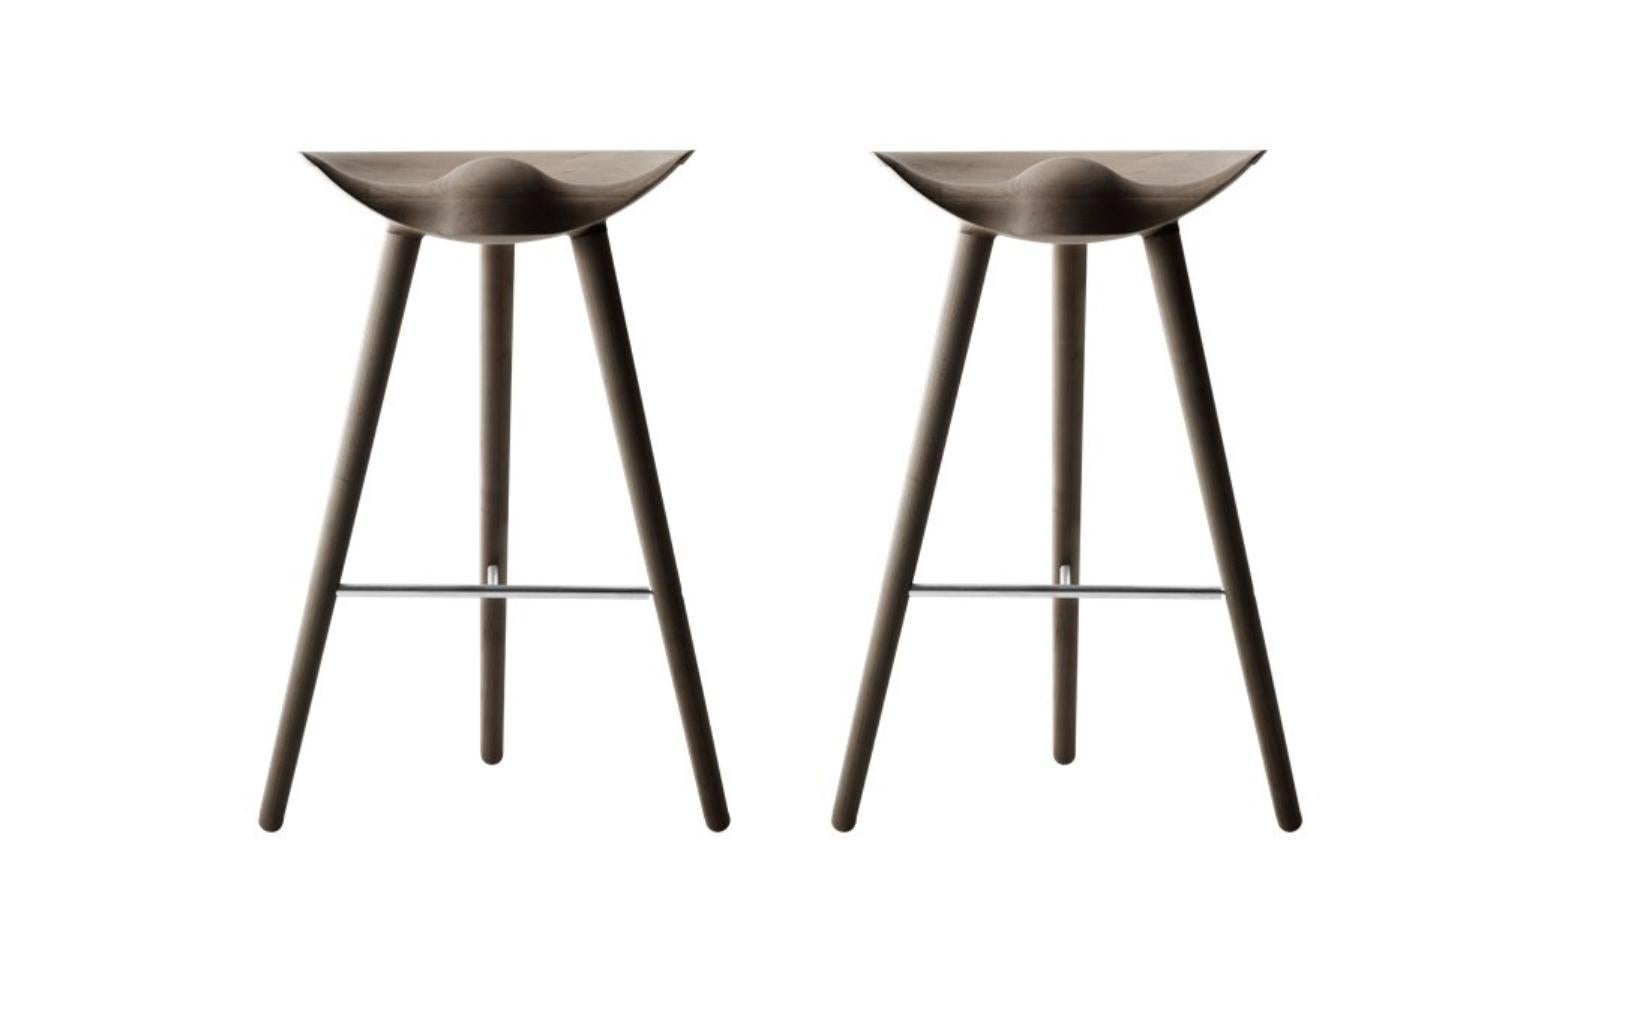 Set of 2 ML 42 brown oak and stainless steel bar stools by Lassen
Dimensions: H 77 x W 36 x L 55.5 cm
Materials: oak, stainless steel

In 1942 Mogens Lassen designed the Stool ML42 as a piece for a furniture exhibition held at the Danish Museum of